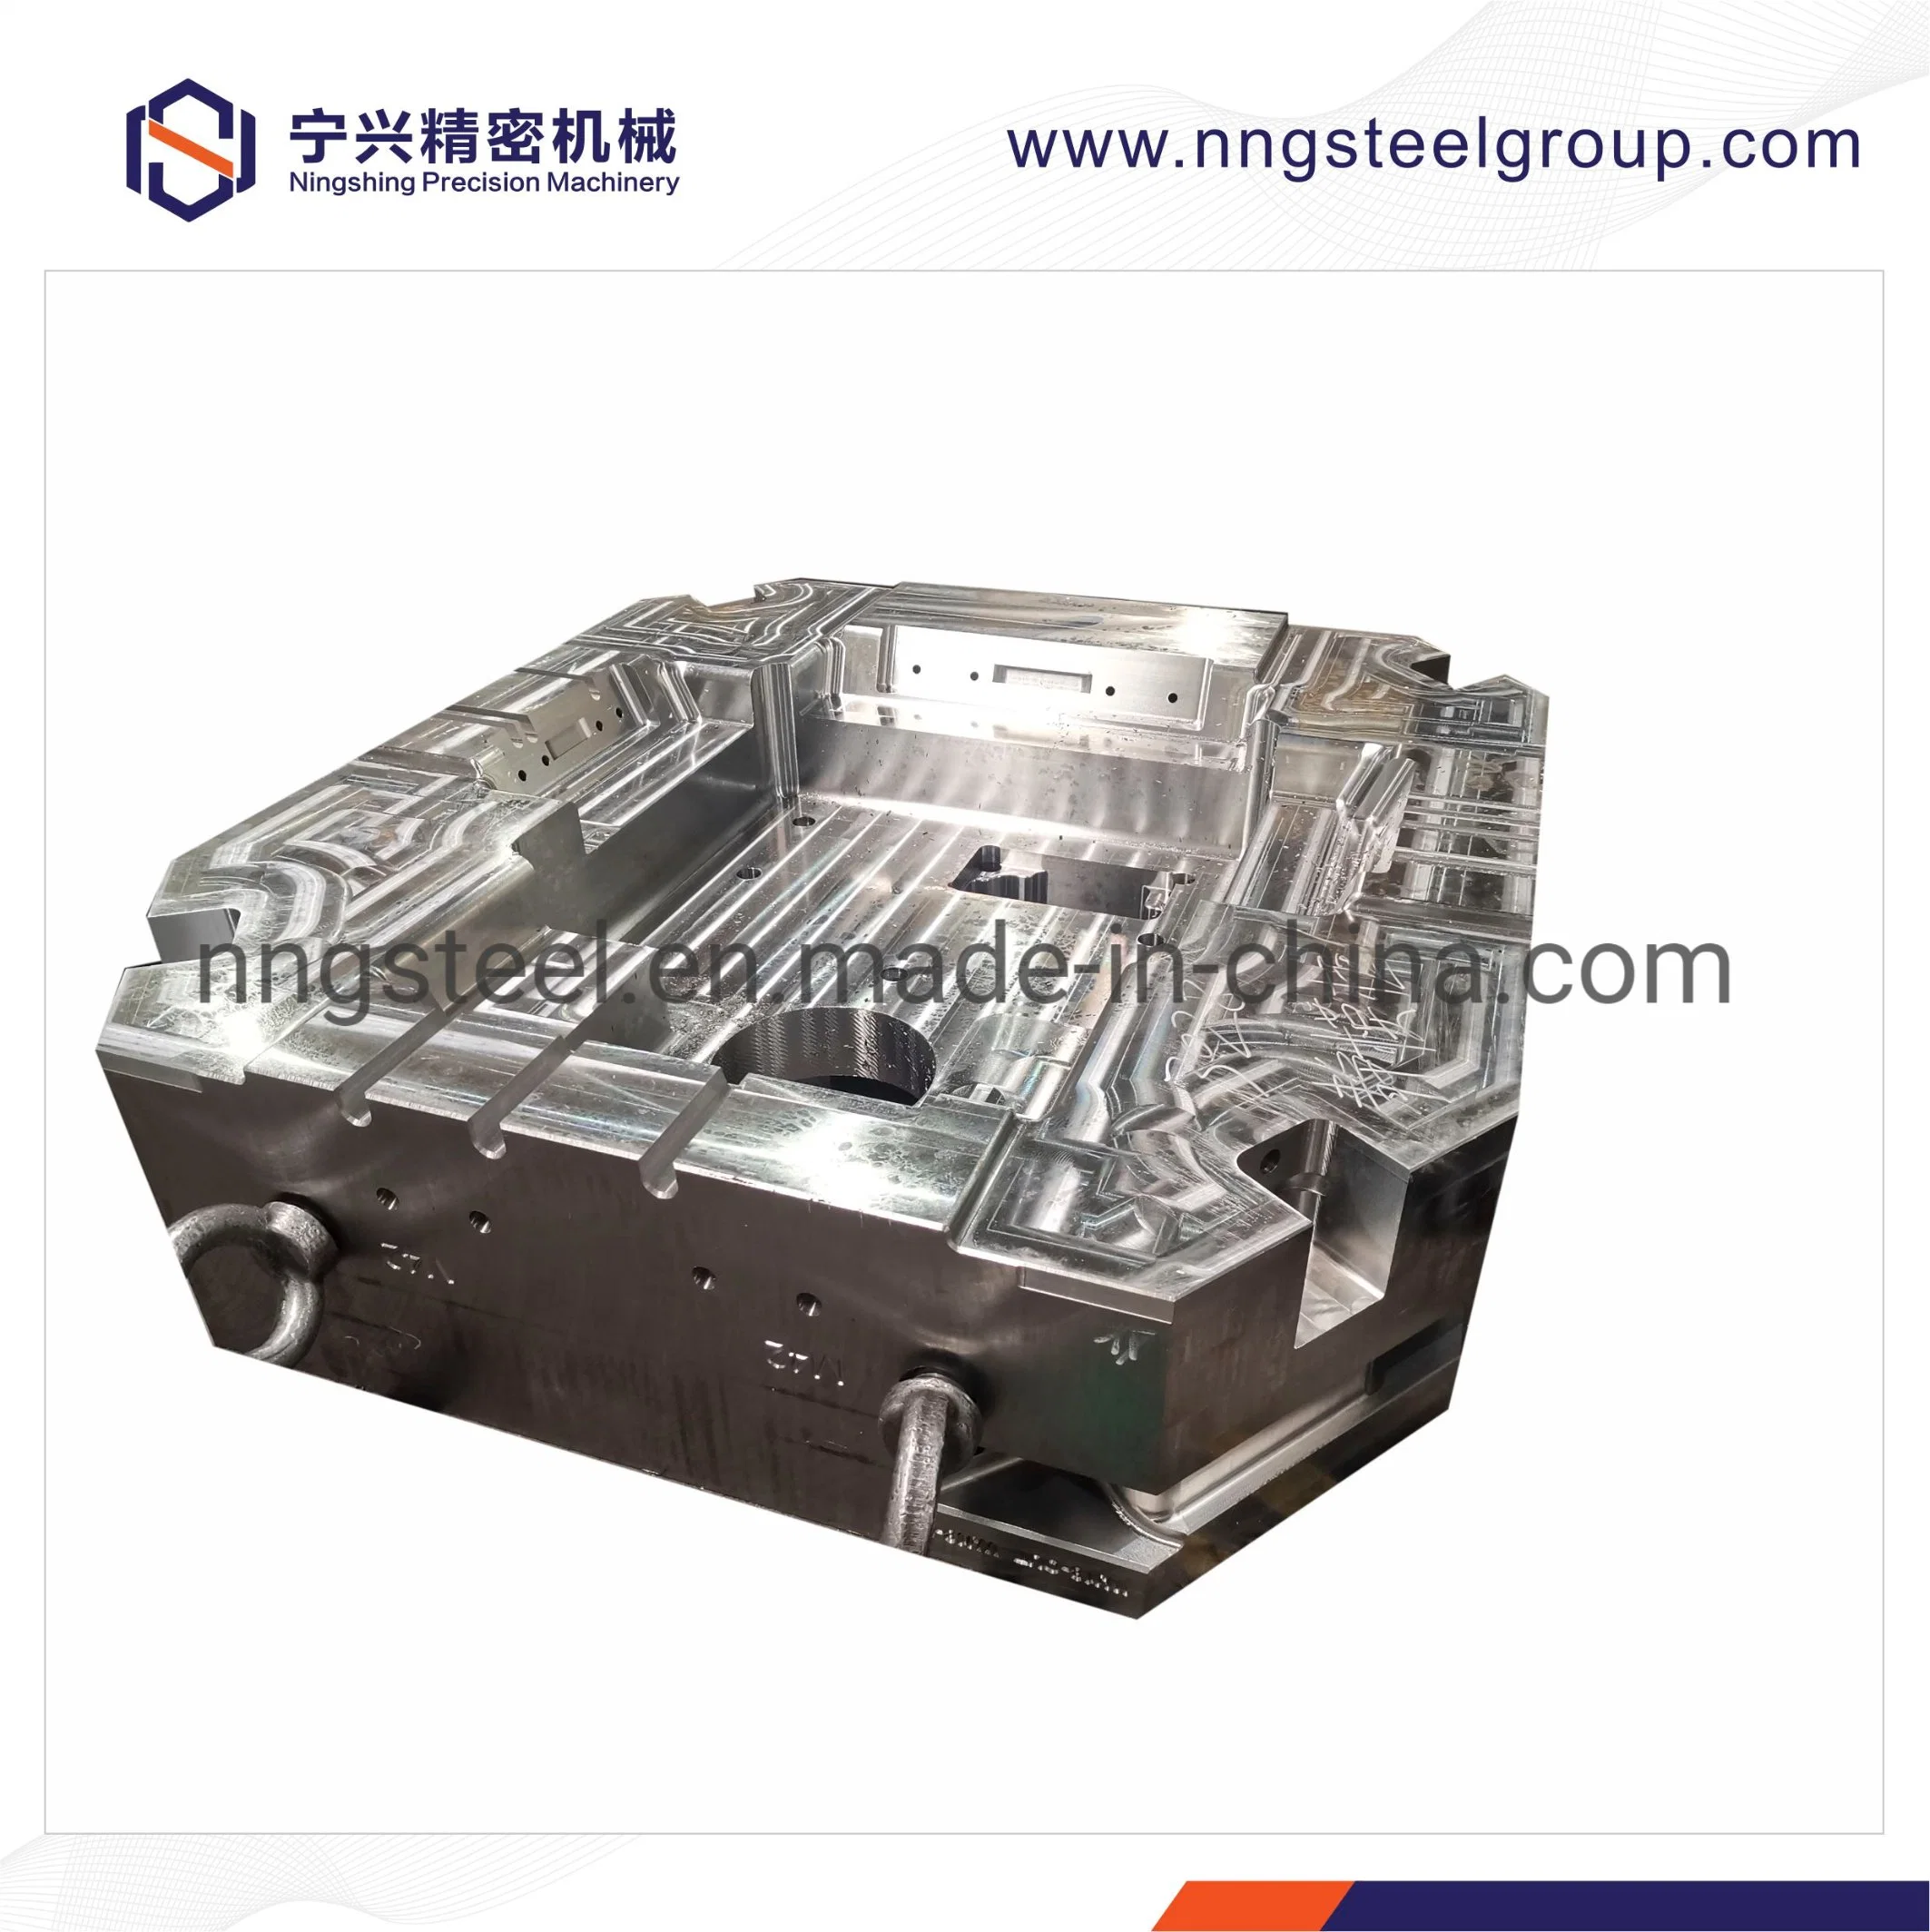 Plastic Injection Mold with Mould Non-Standard Tool Mold Base Design Frame Die Casting Die